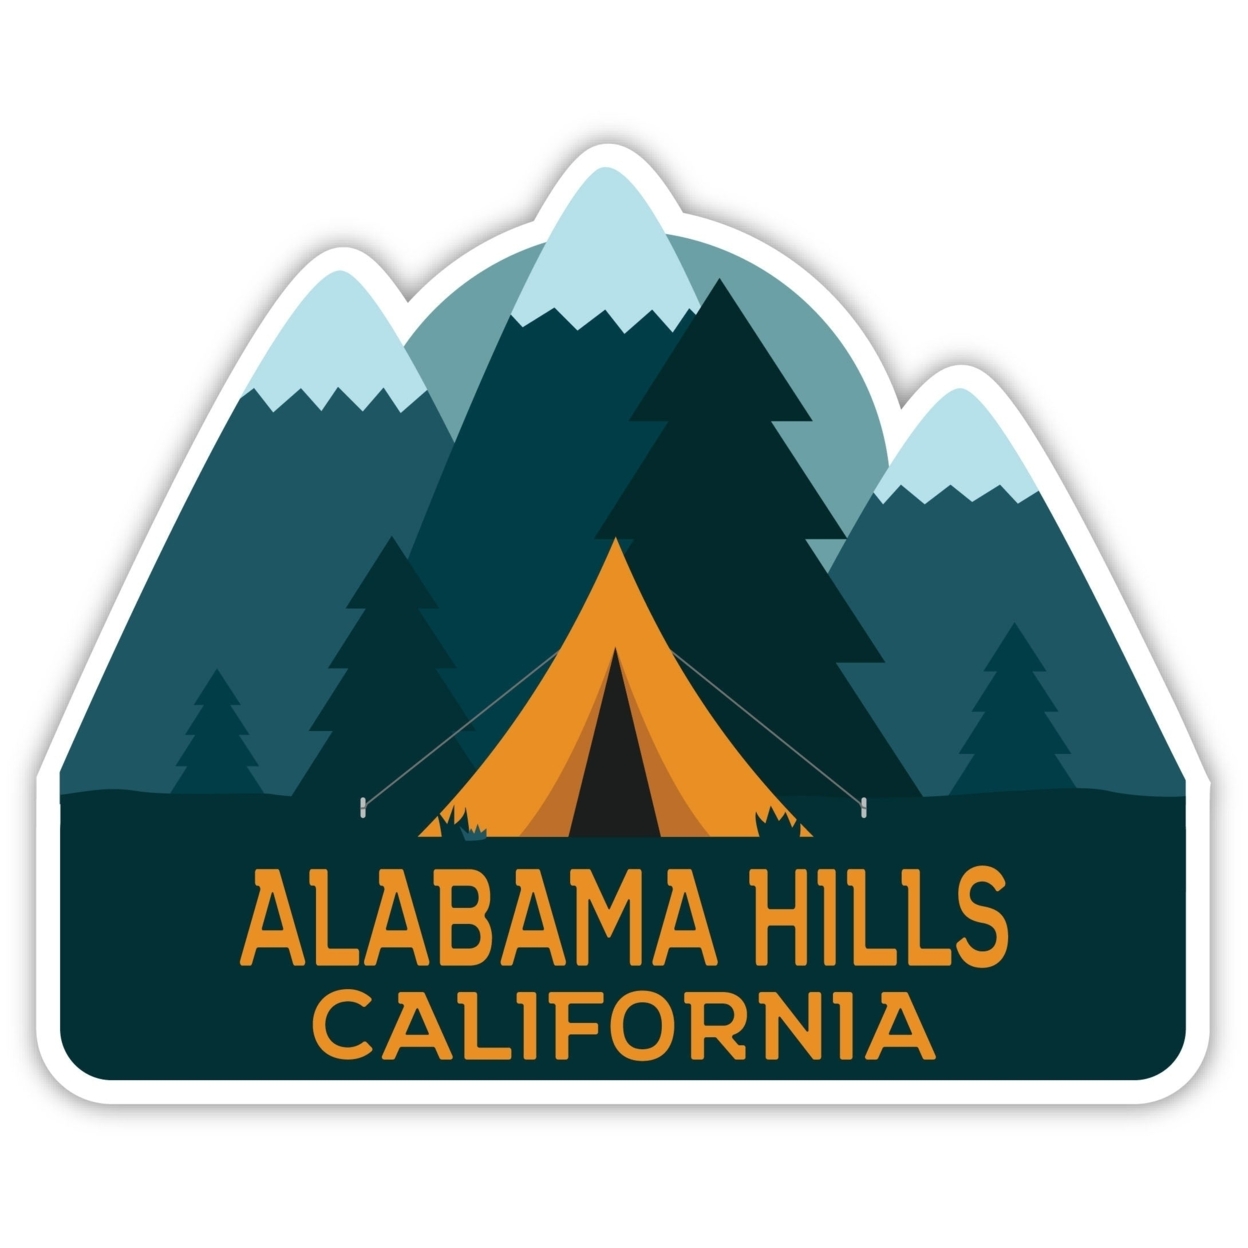 Alabama Hills California Souvenir Decorative Stickers (Choose Theme And Size) - 4-Pack, 12-Inch, Tent